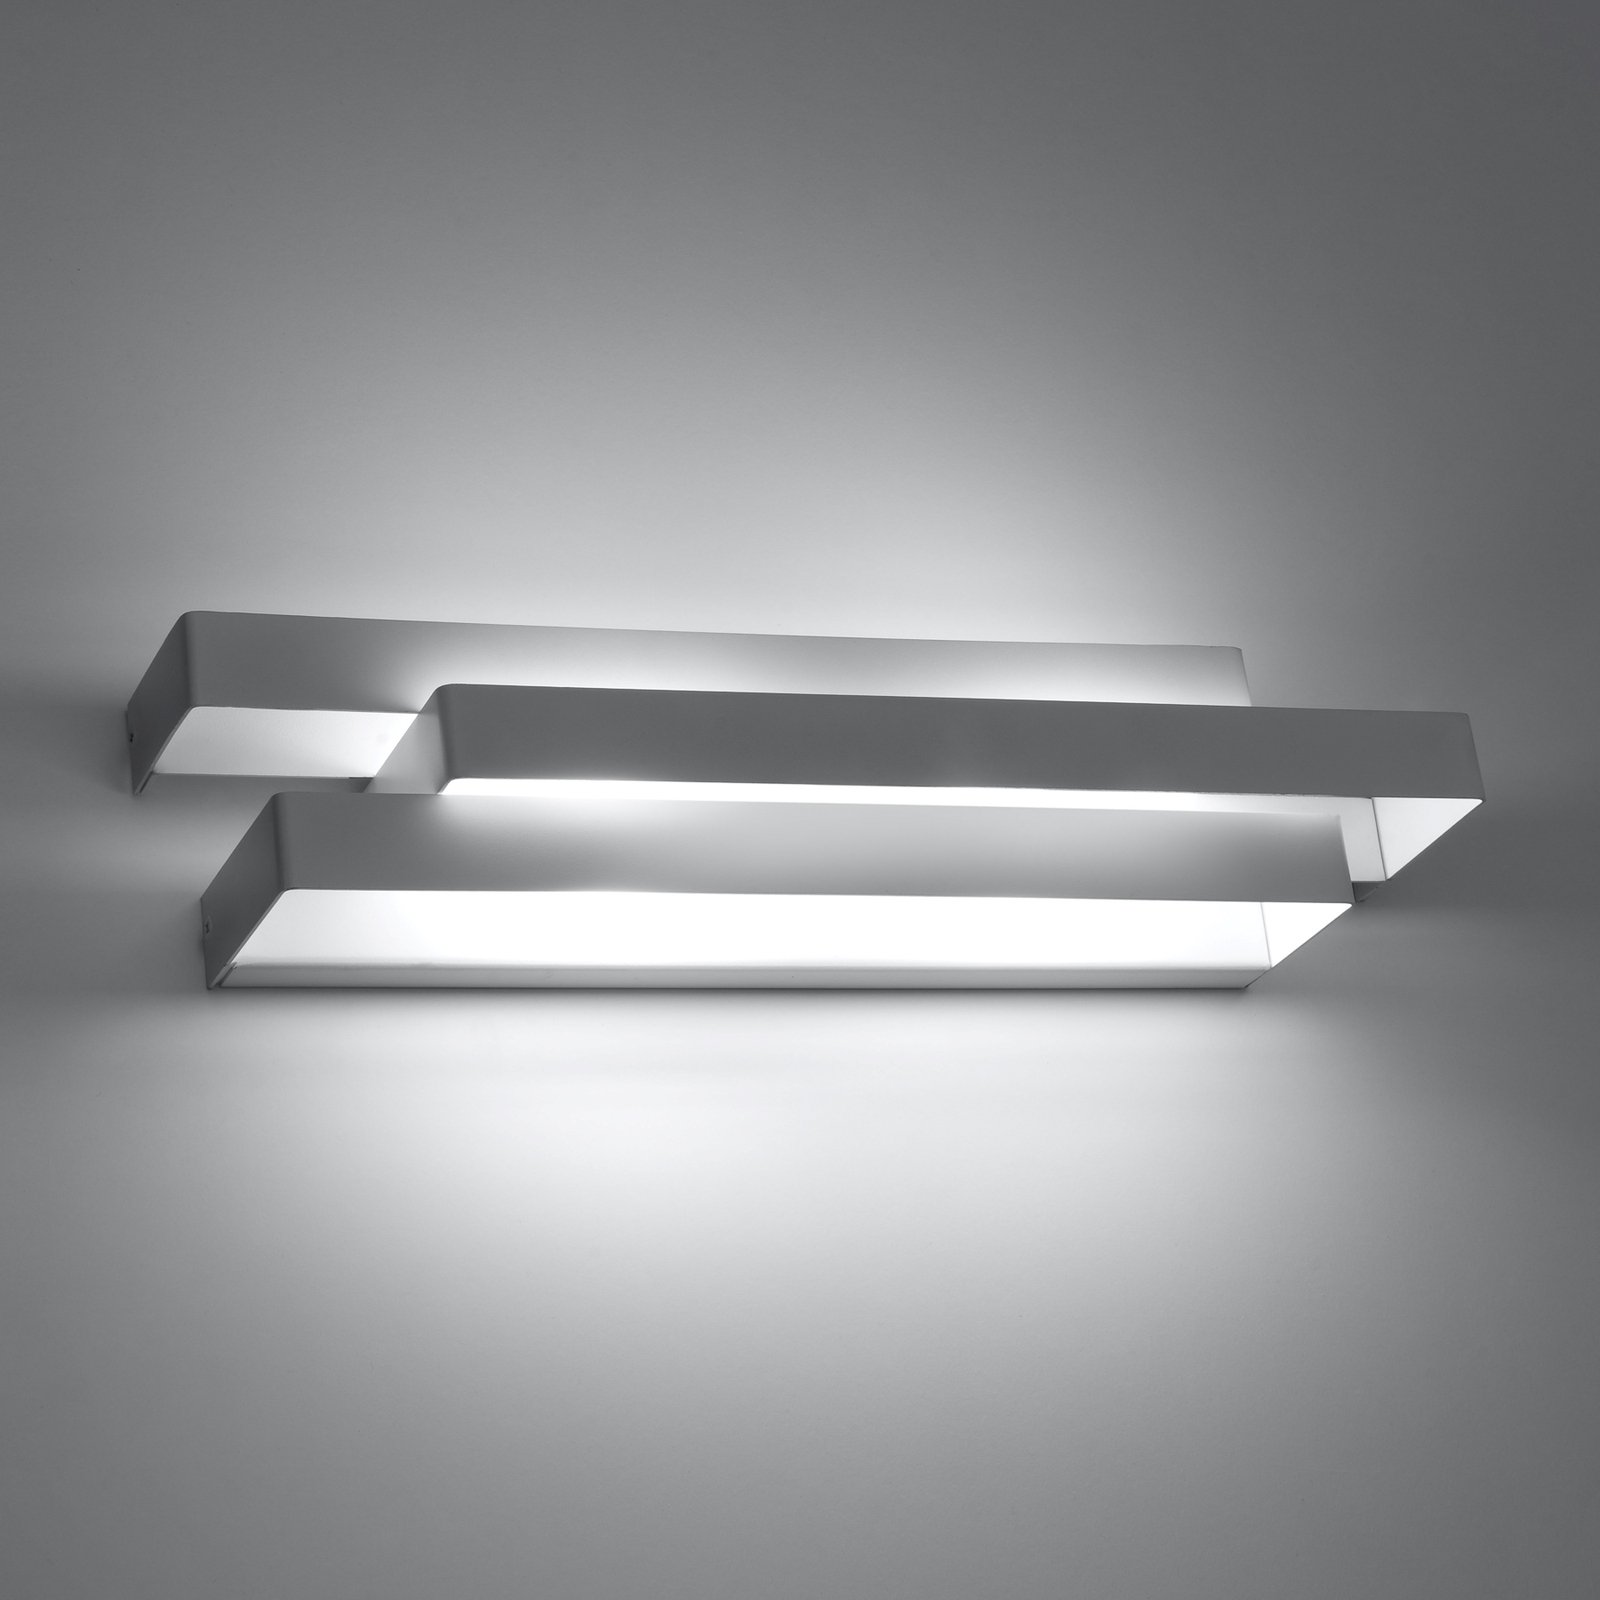 Euluna Marcellus wall light consisting of three elements